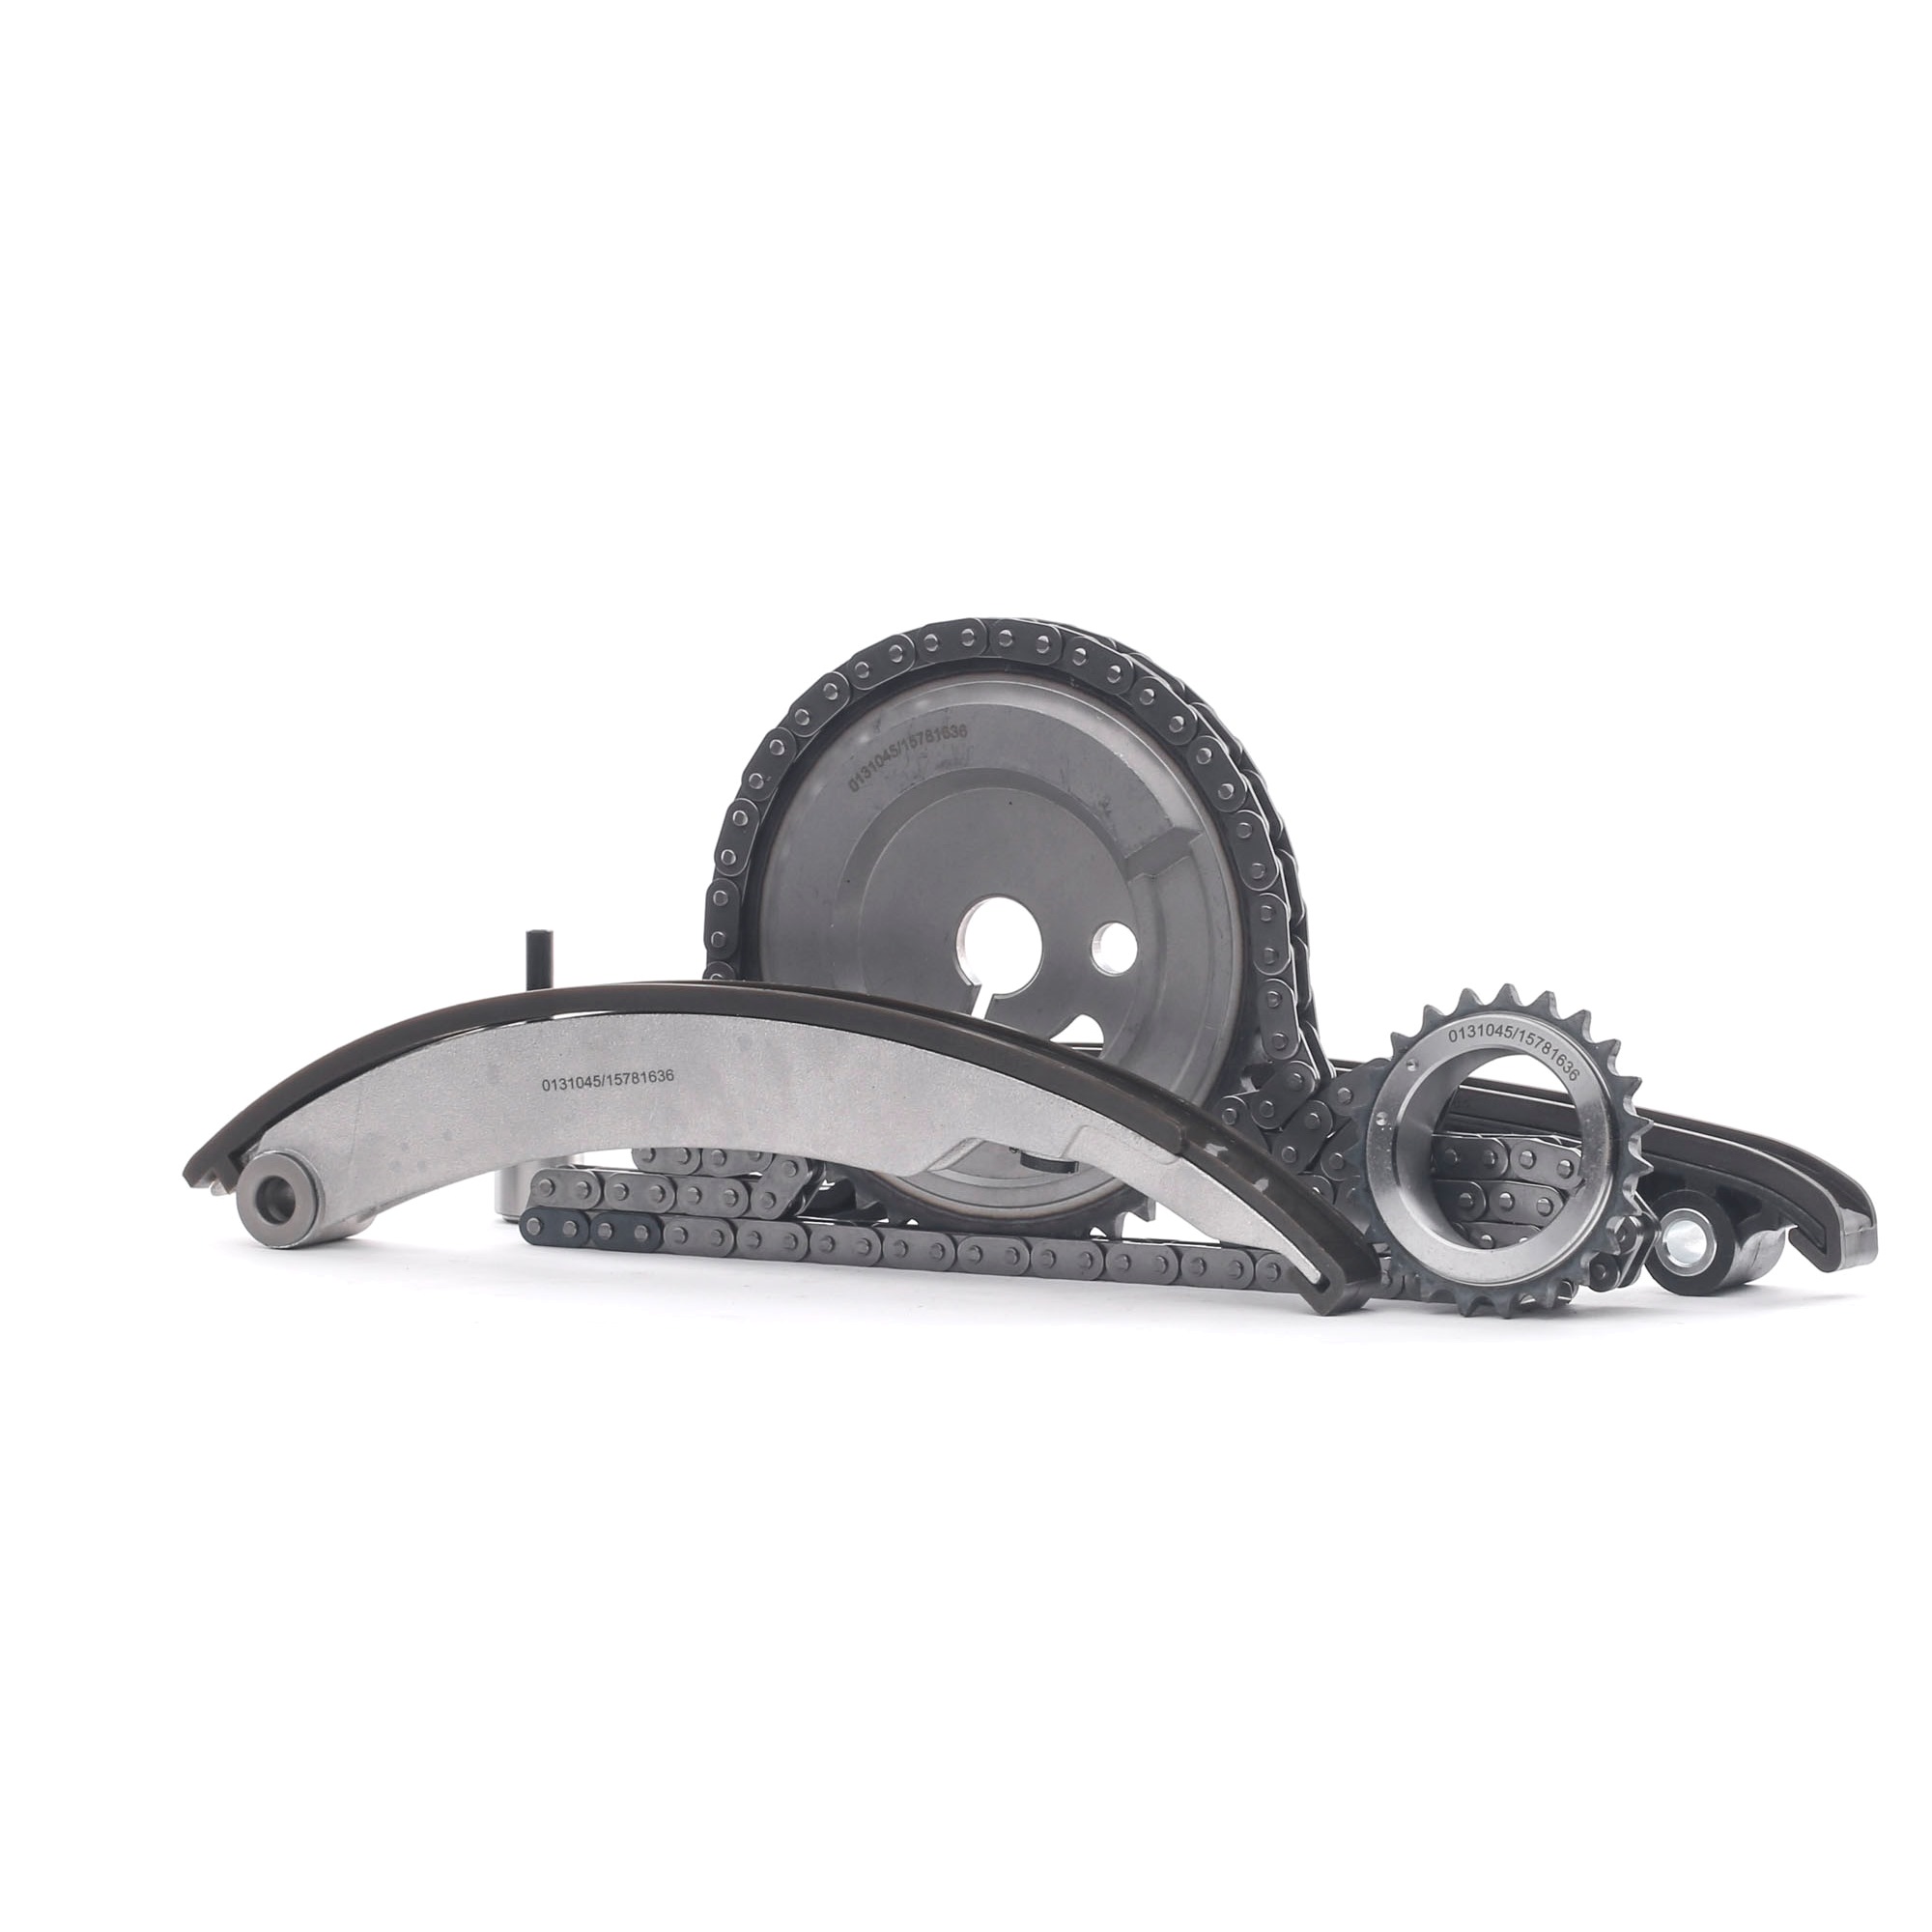 STARK SKTCK-22440266 Timing chain kit without gaskets/seals, with gear, Simplex, Closed chain